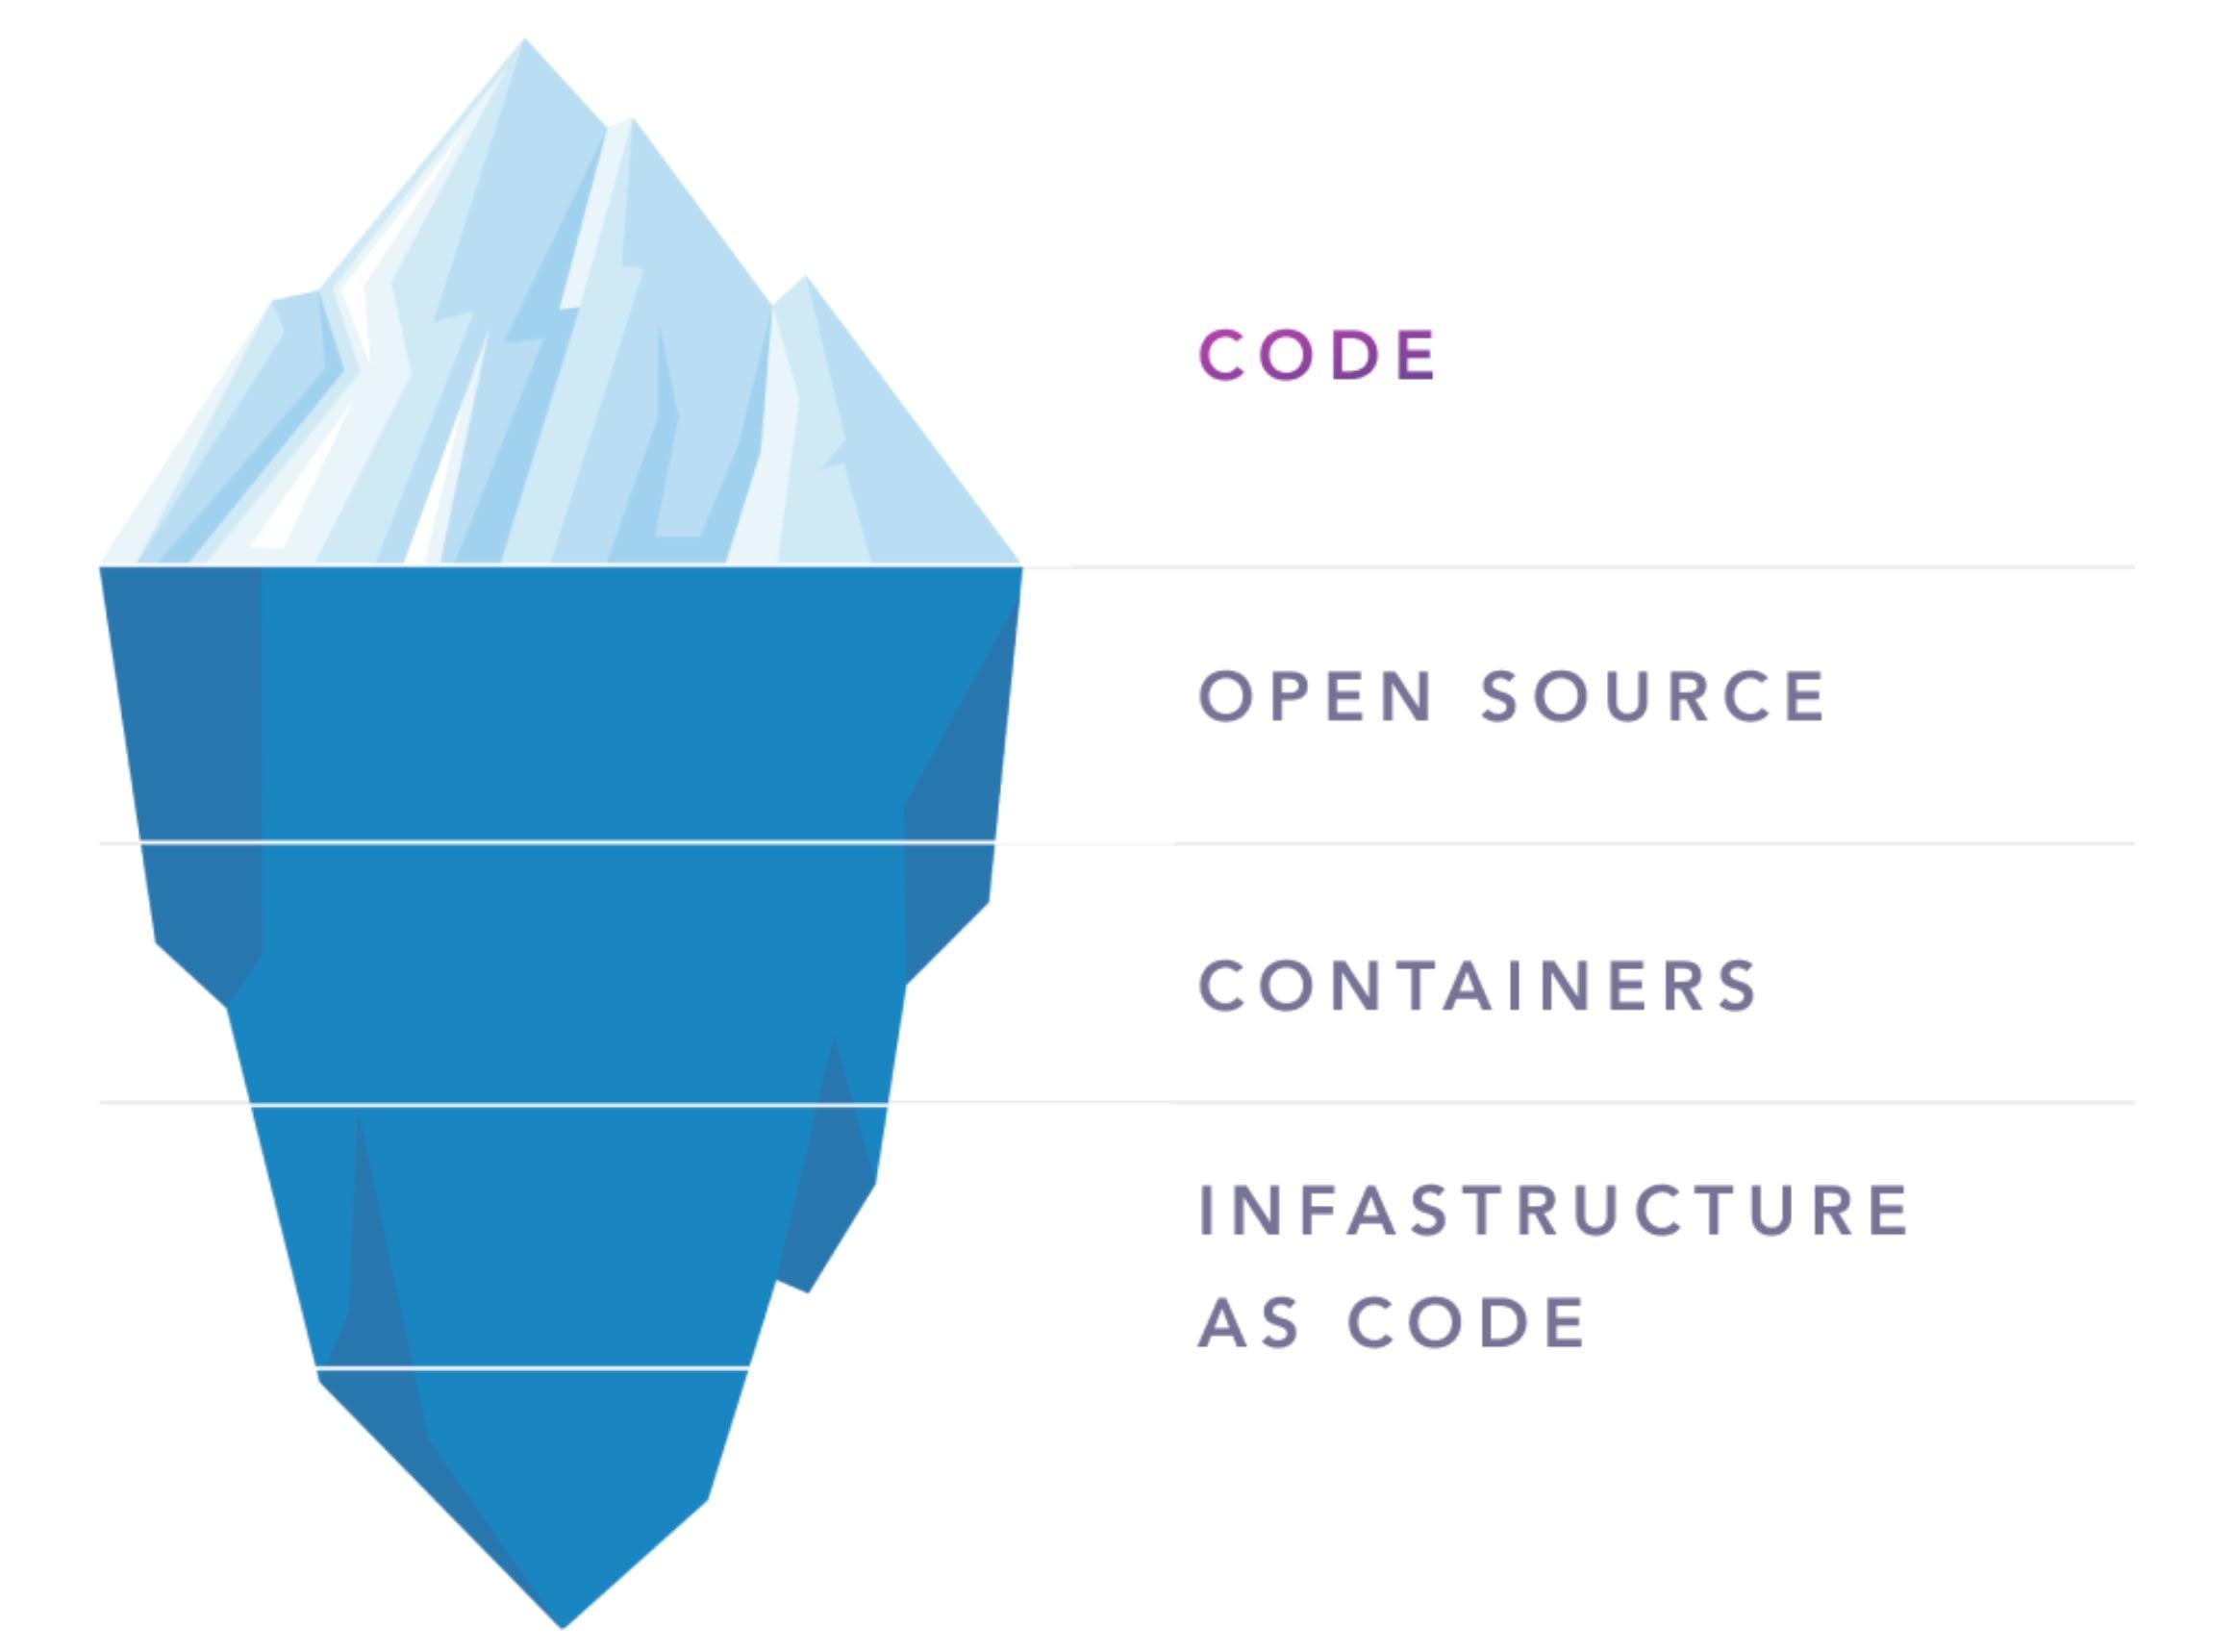 iceberg graphic with Code above water, followed by Open Source, Container & Infrastructure as code below water.